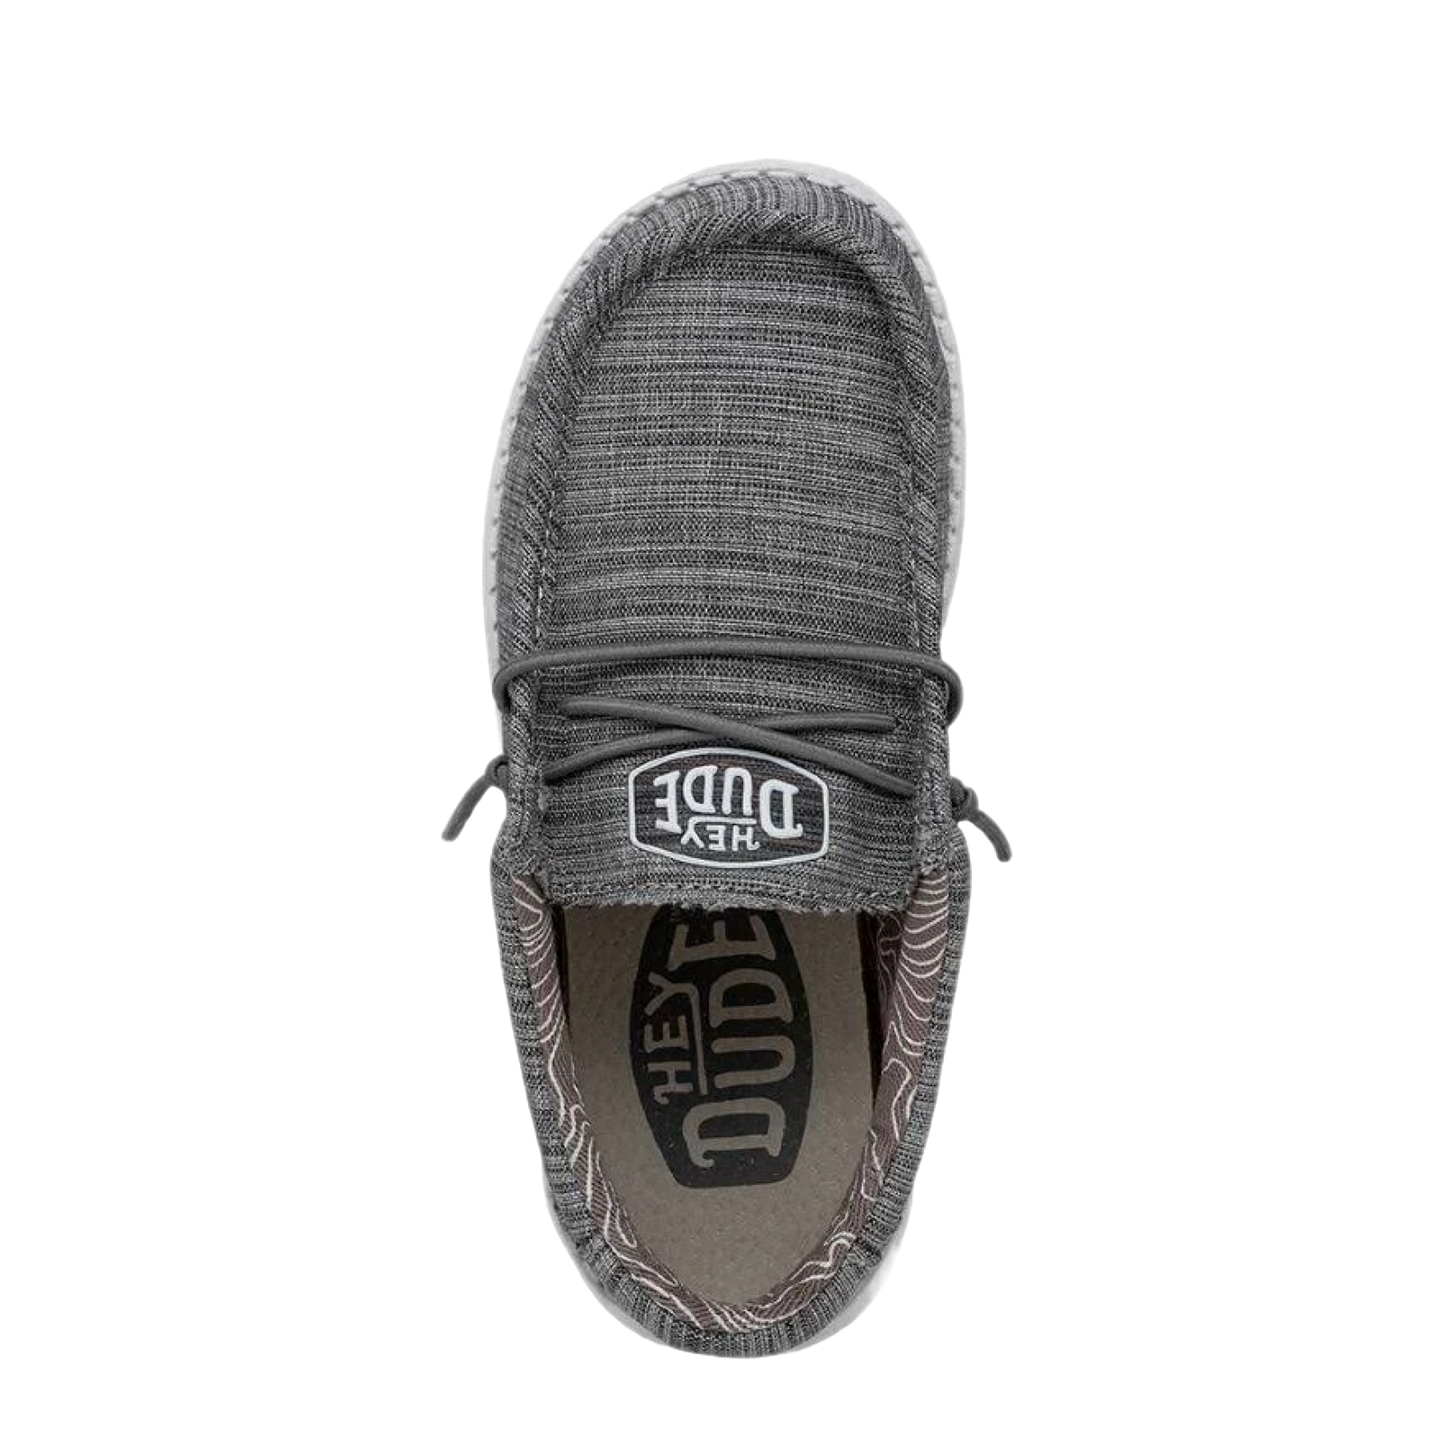 Hey Dude Wally Toddler Linen Blend Stone Grey Slip On Shoes 40160-270